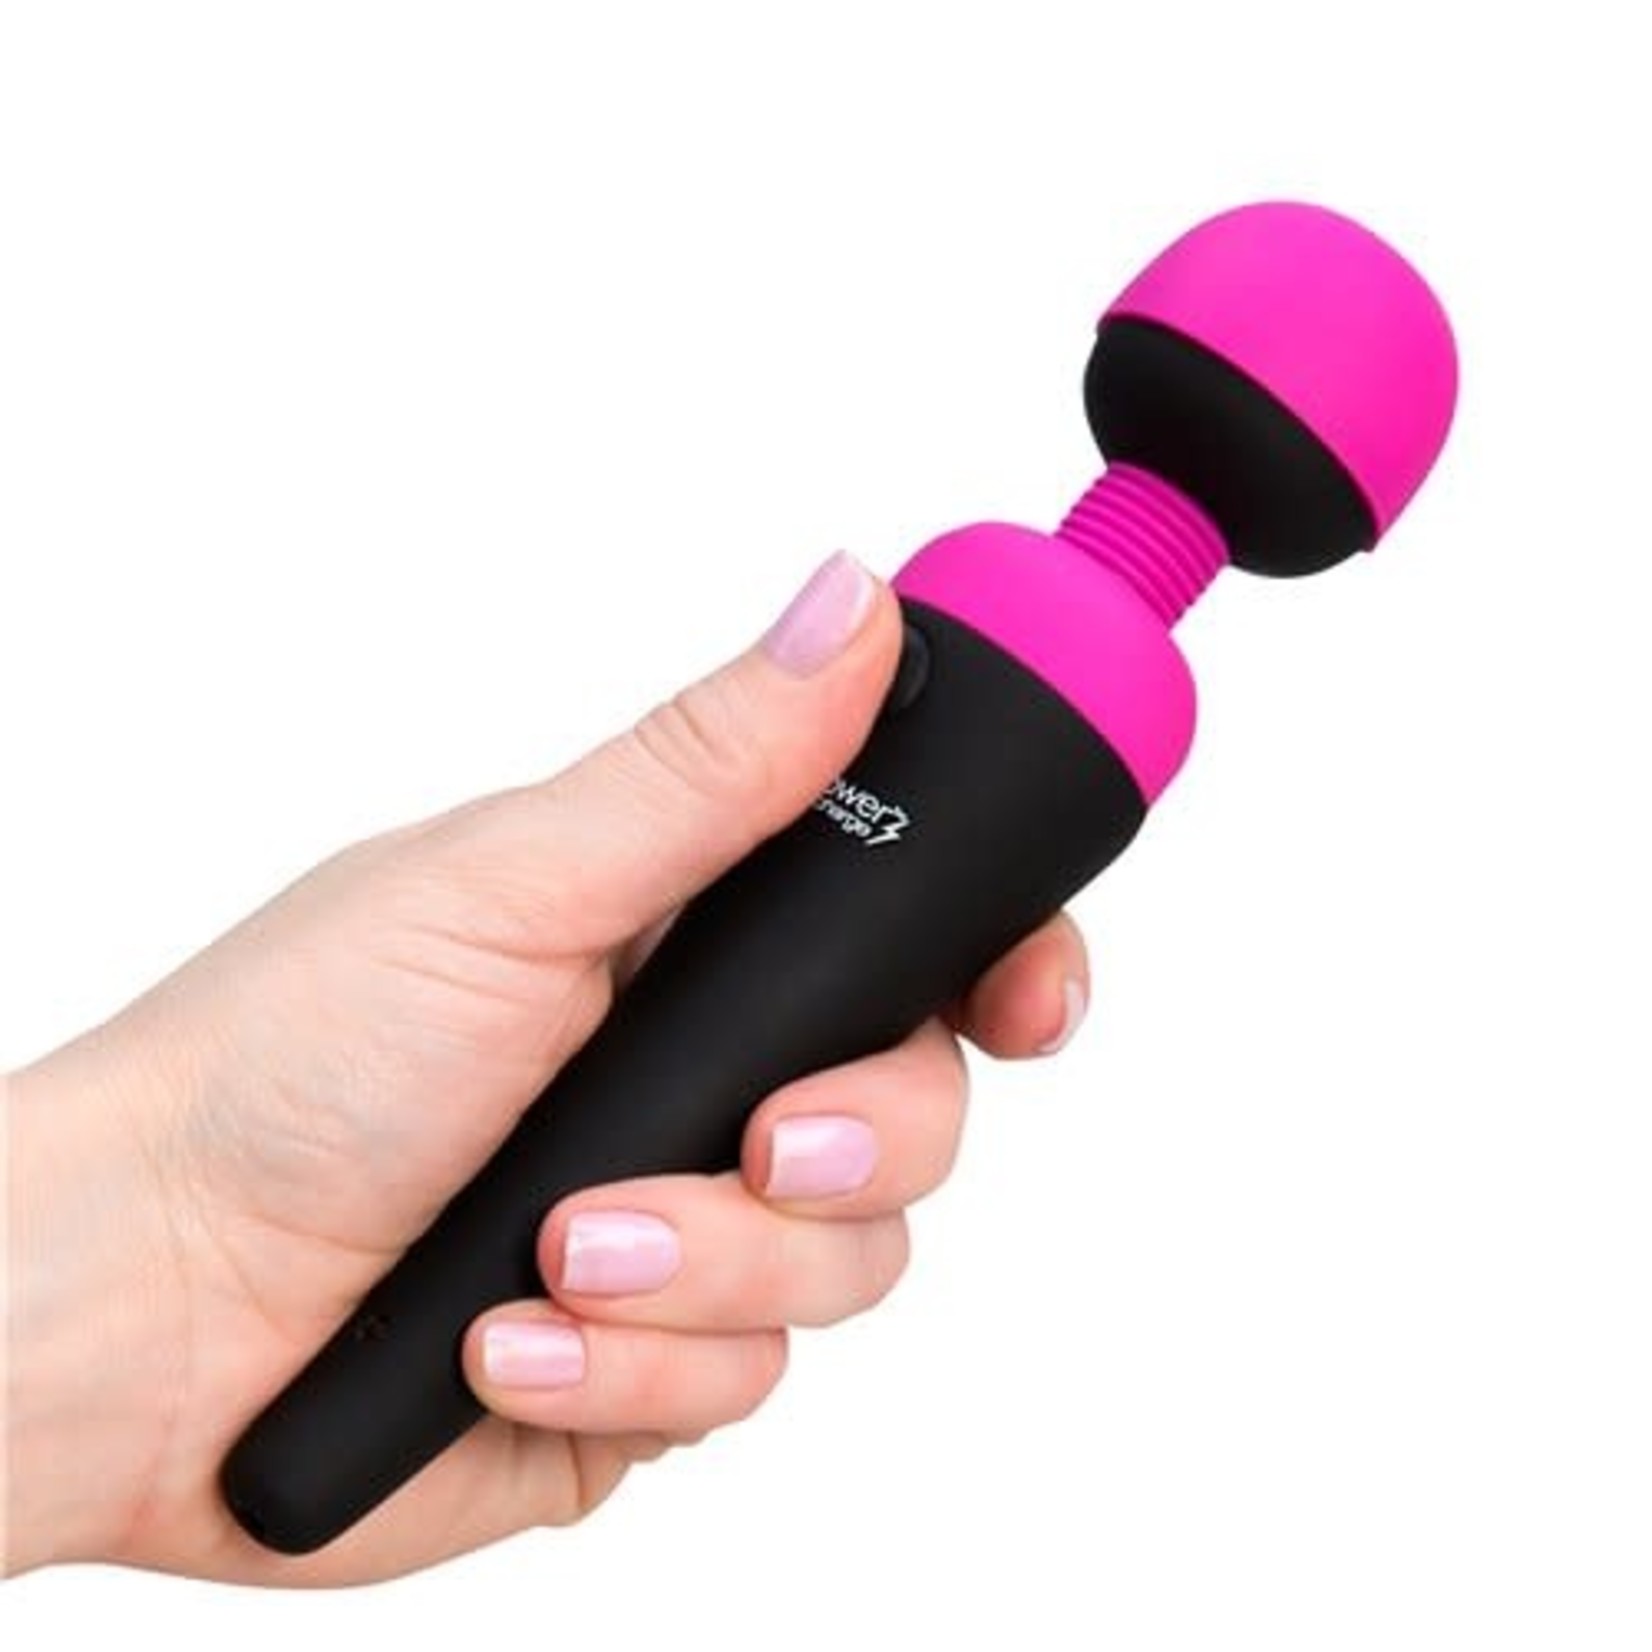 PALMPOWER RECHARGE WATERPROOF PERSONAL MASSAGER